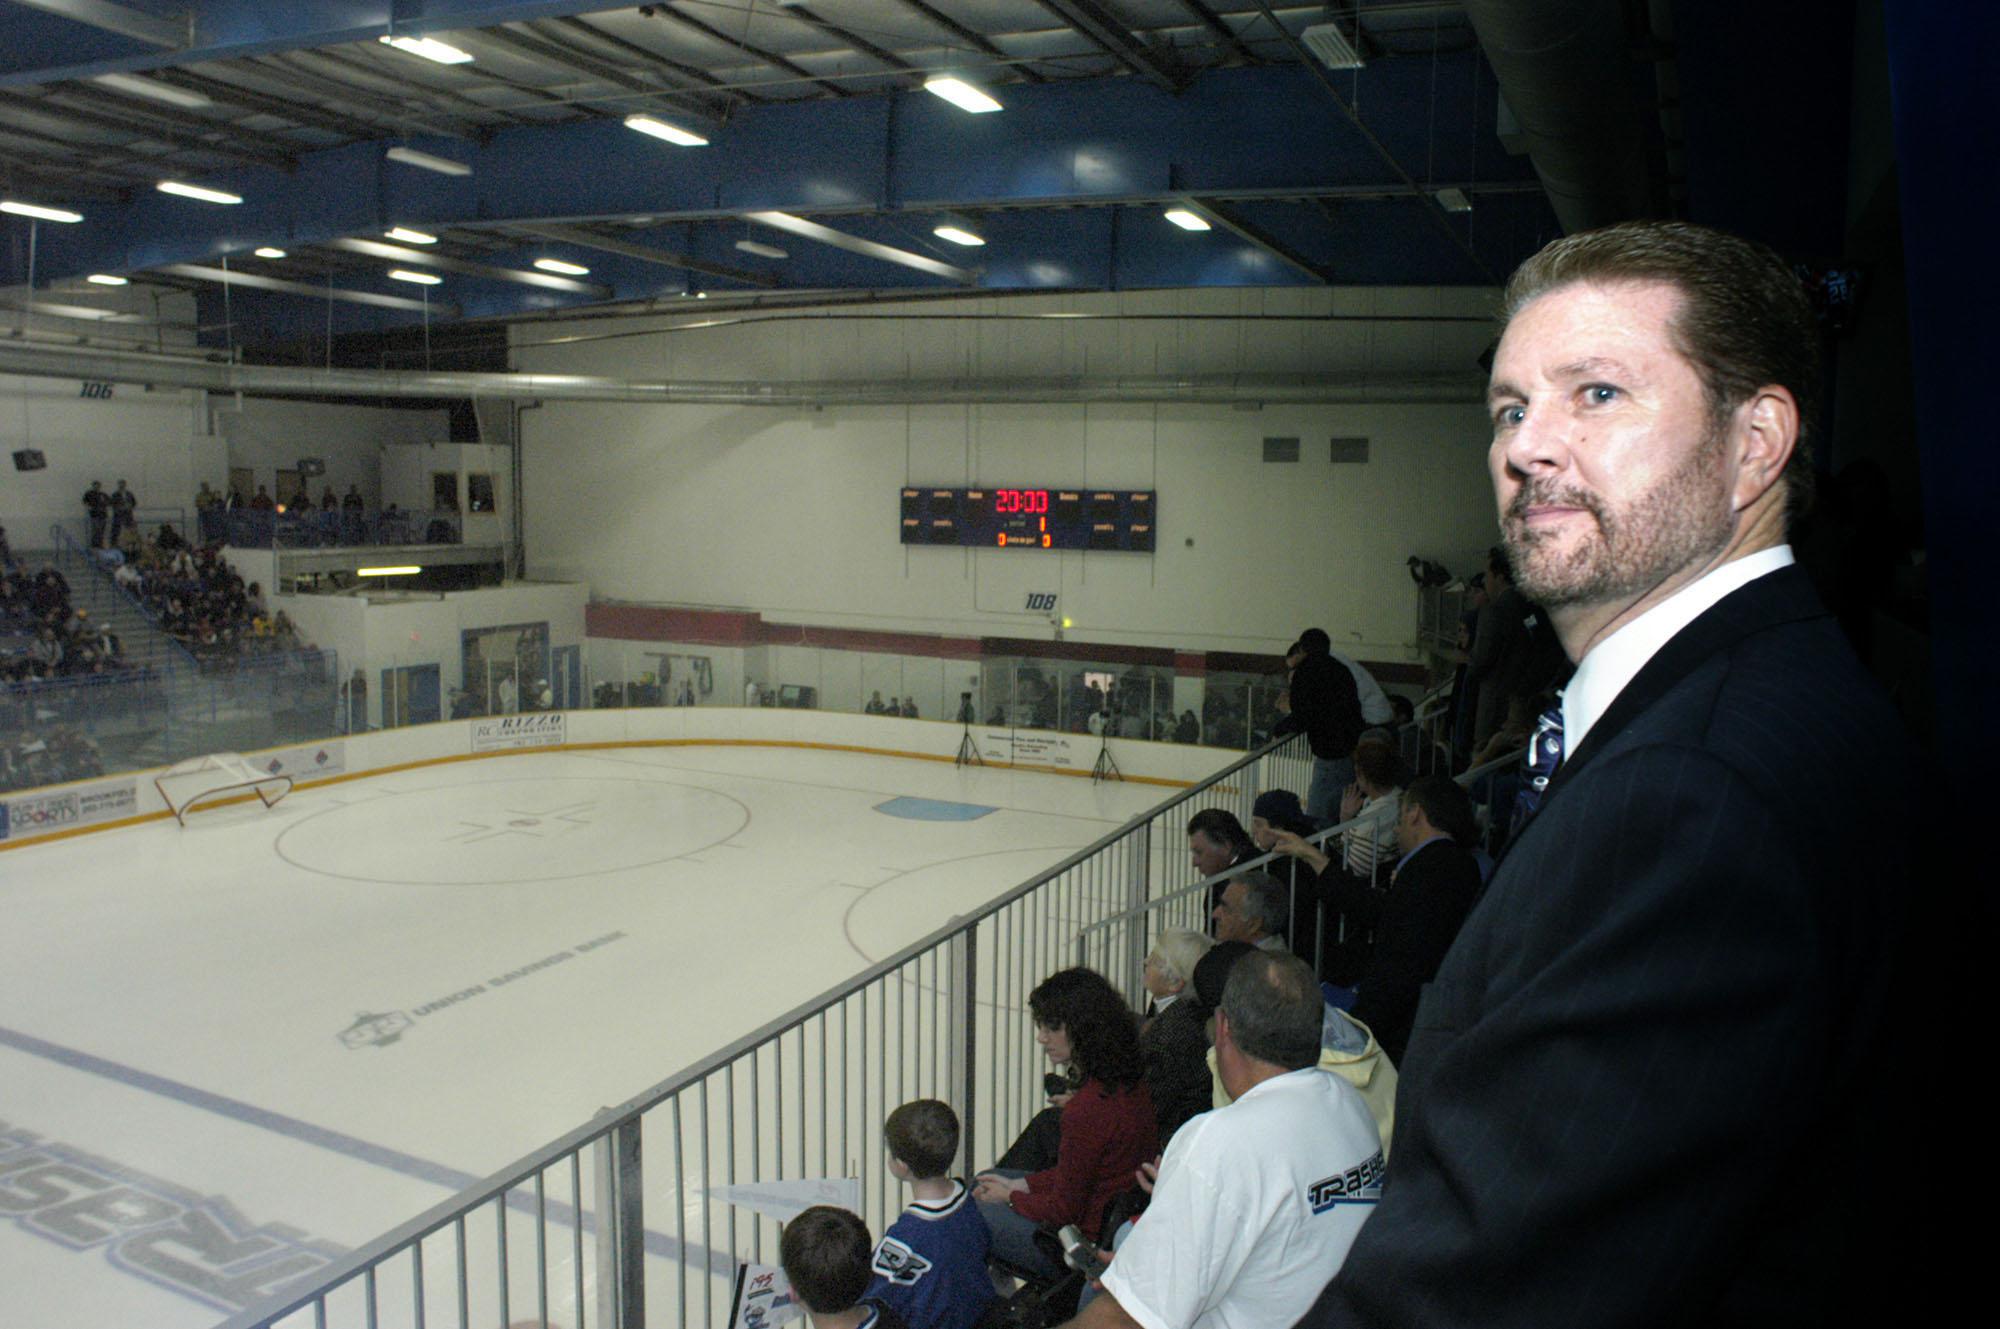 Movie About The Danbury Trashers May Be In The Works